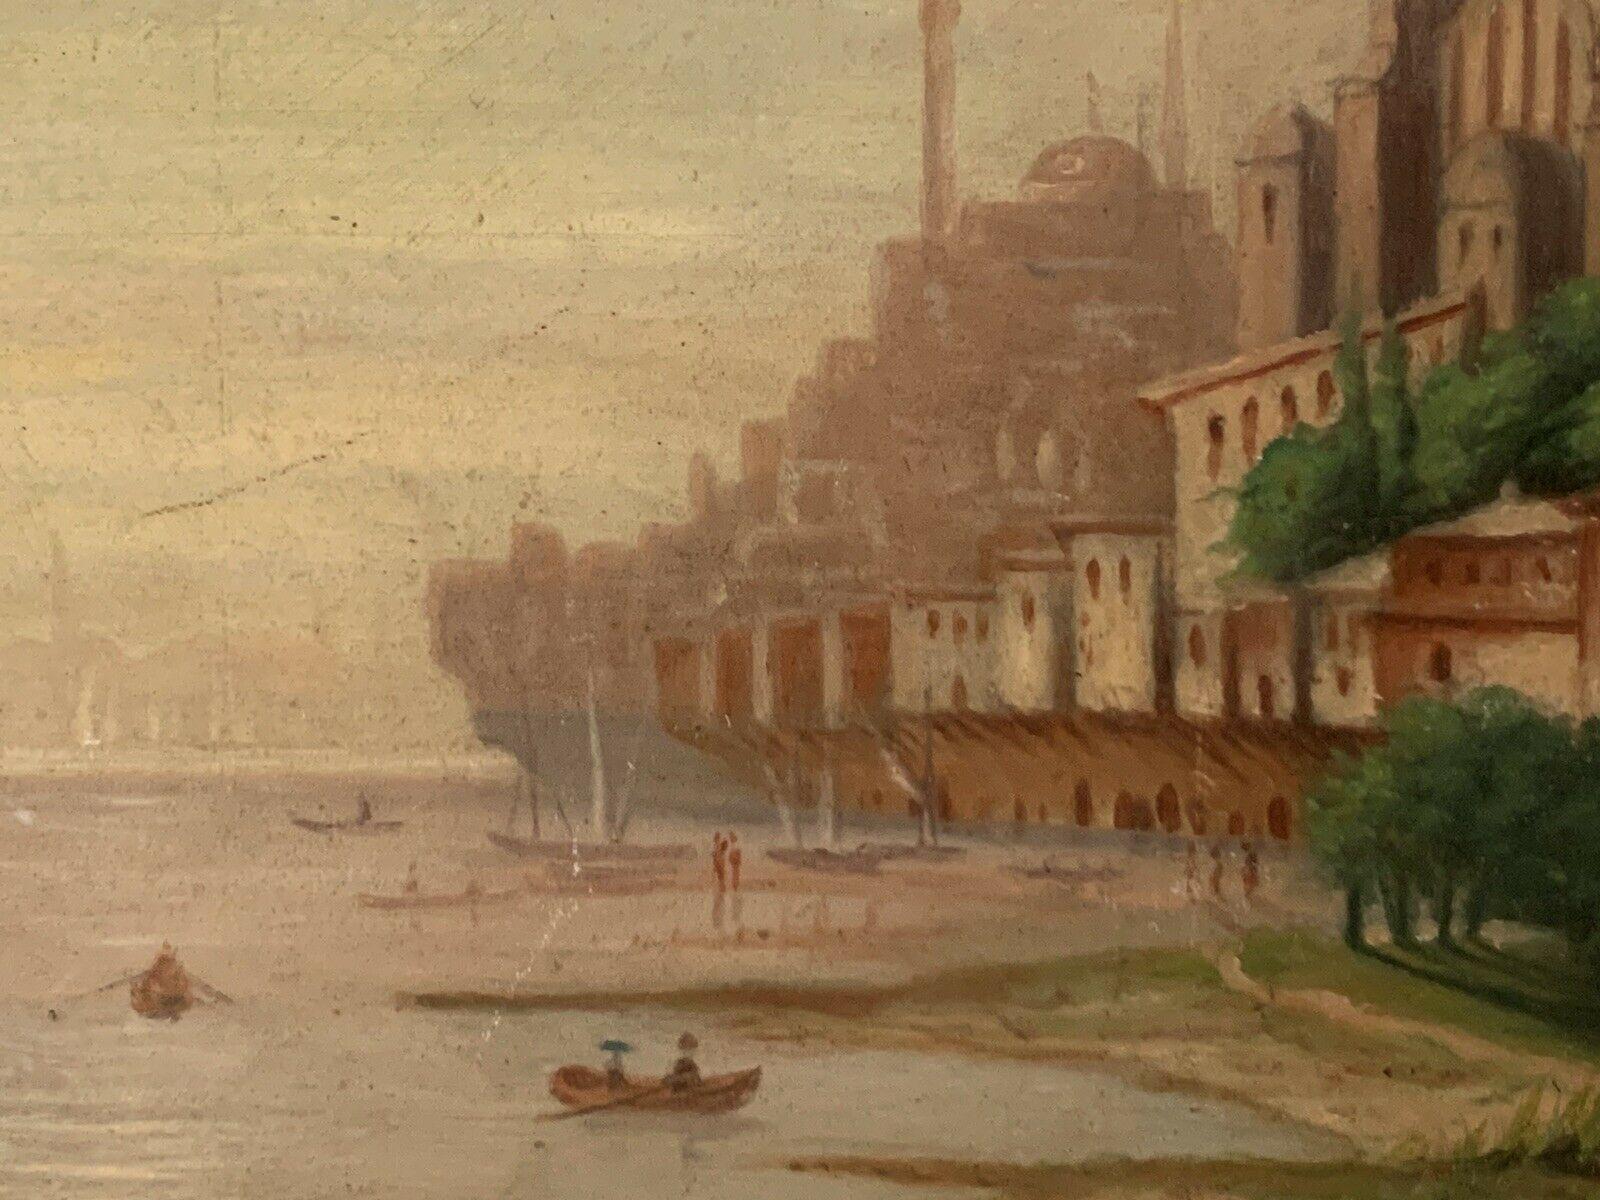 'Sunset'
Continental School, late 19th Century
signed lower left corner
oil painting on wood panel, unframed

painting: 21.5cm x 29.5 cm

Painted with fascinating details which one can stand and admire and notice something new each time... this late